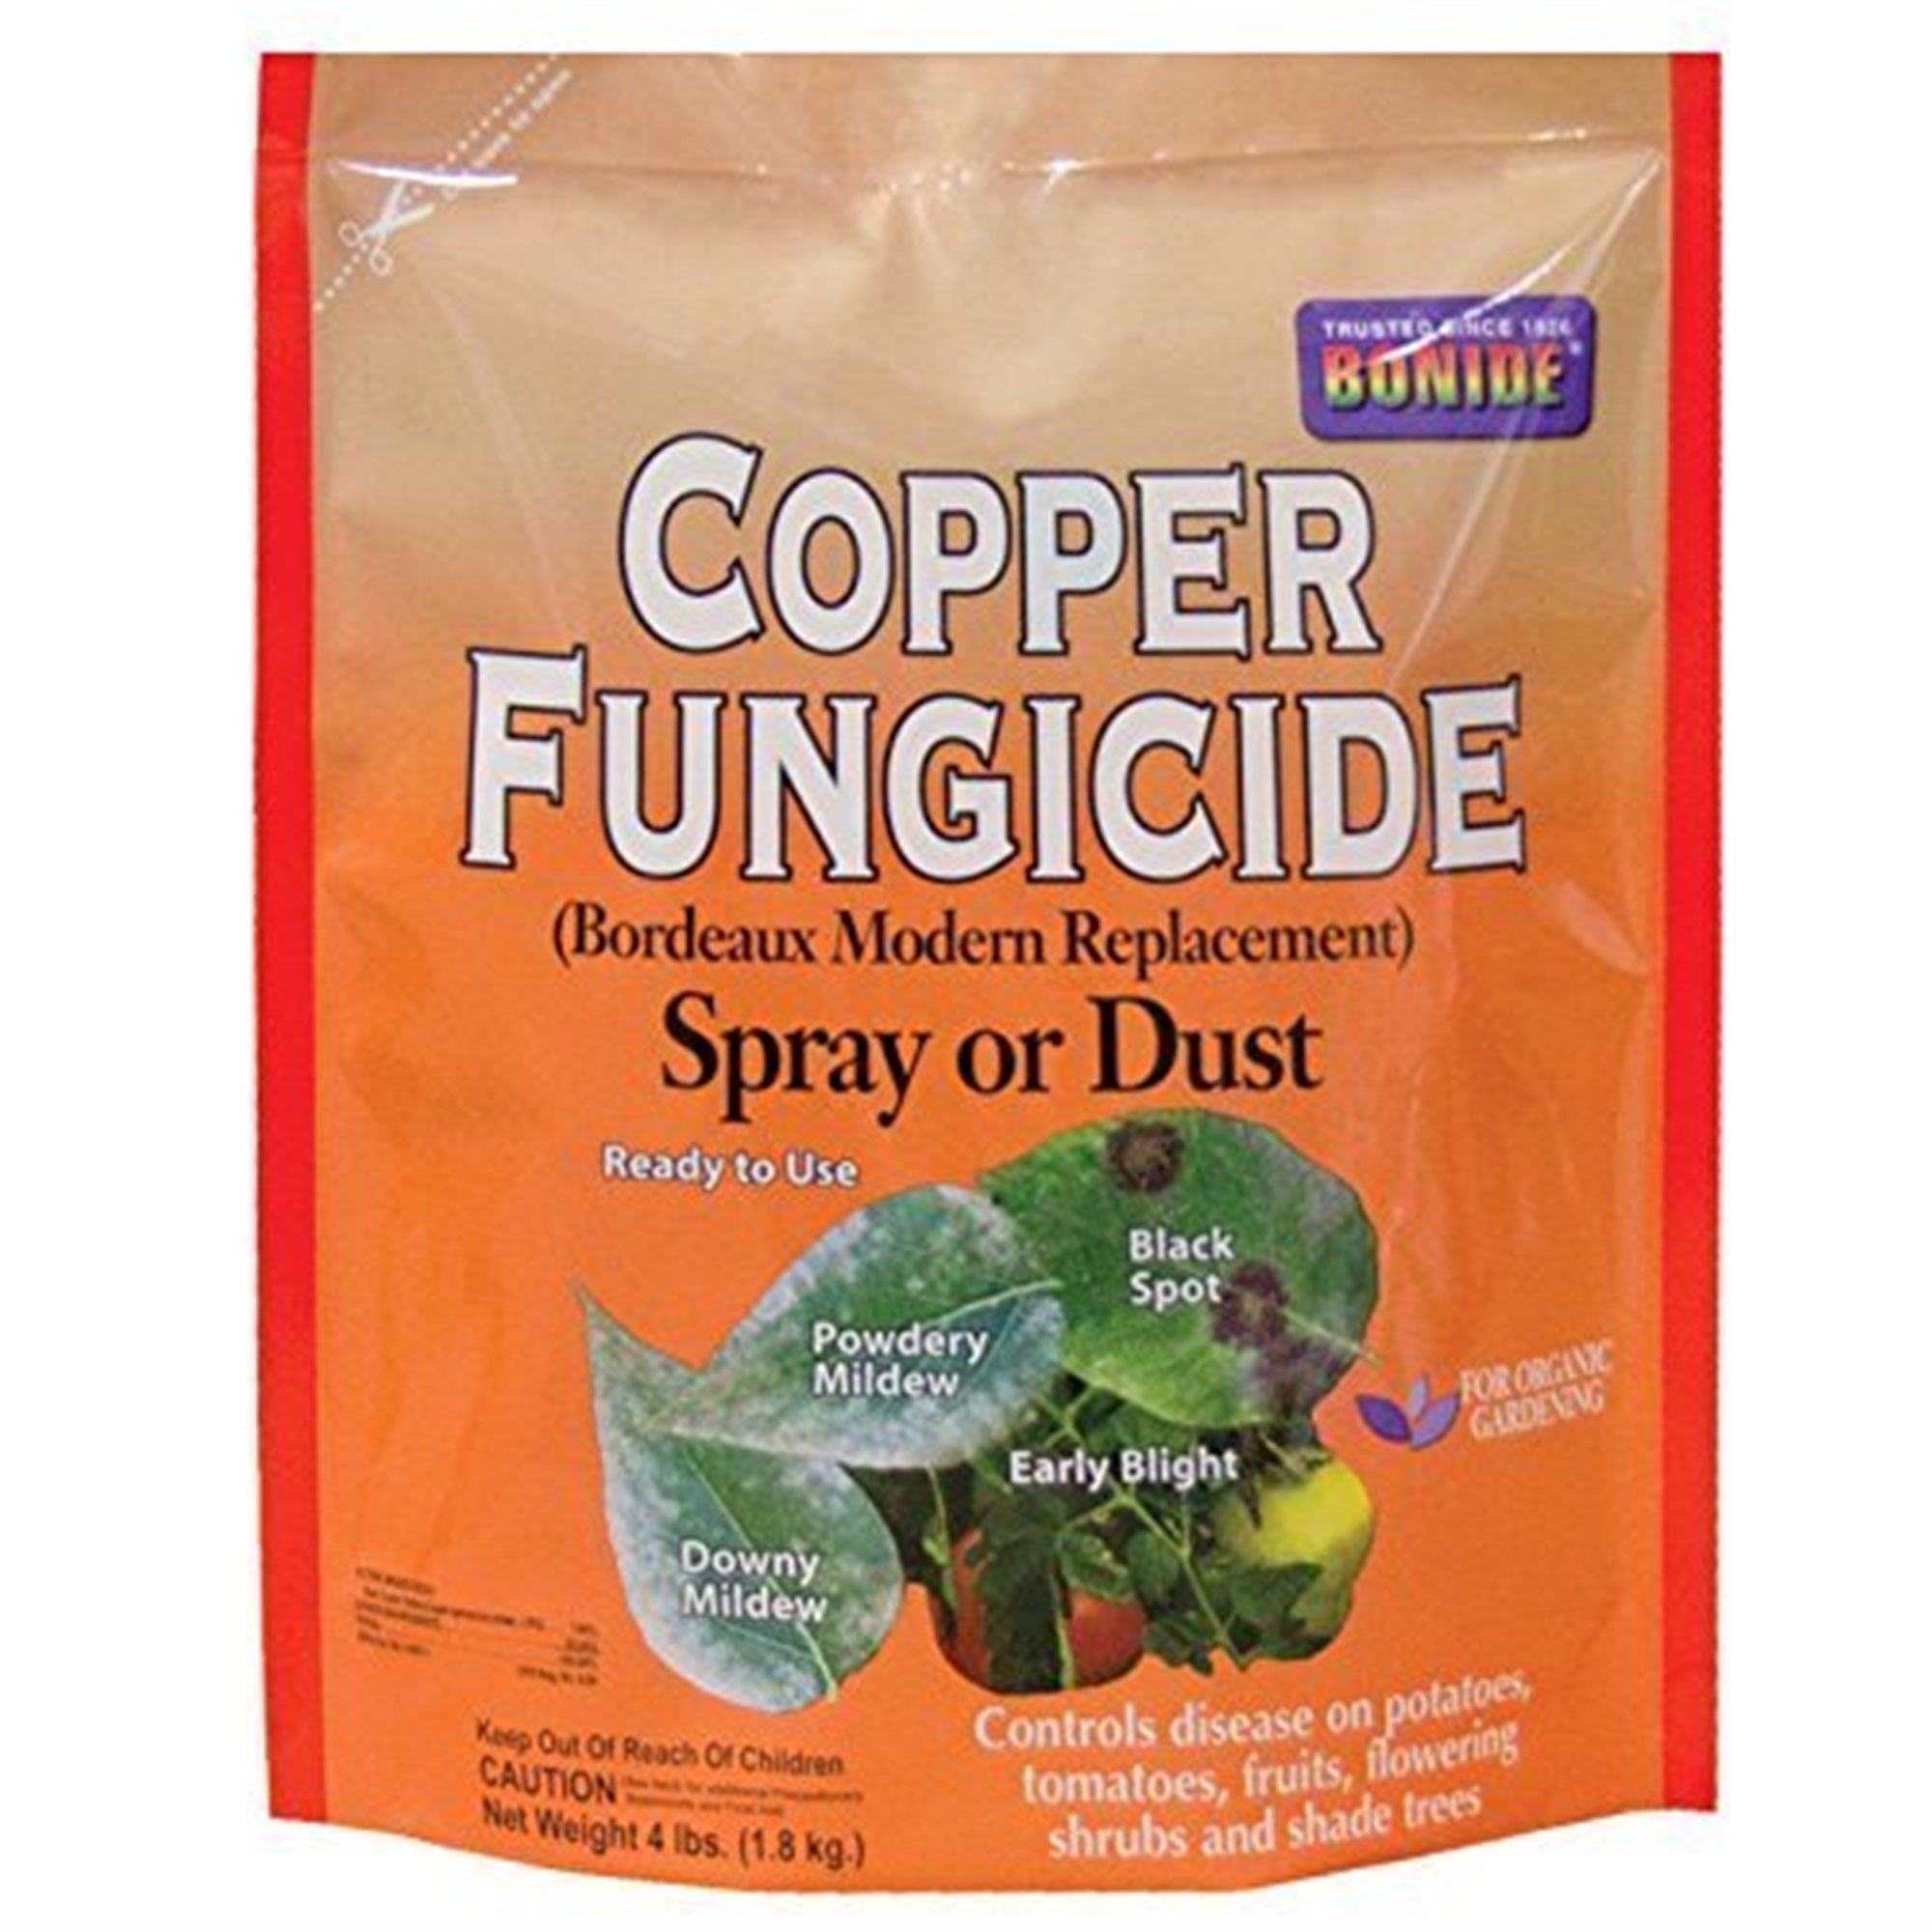 Bonide Copper Sulfate Fungicide (Can Use as Dust or Spray) 4 lbs